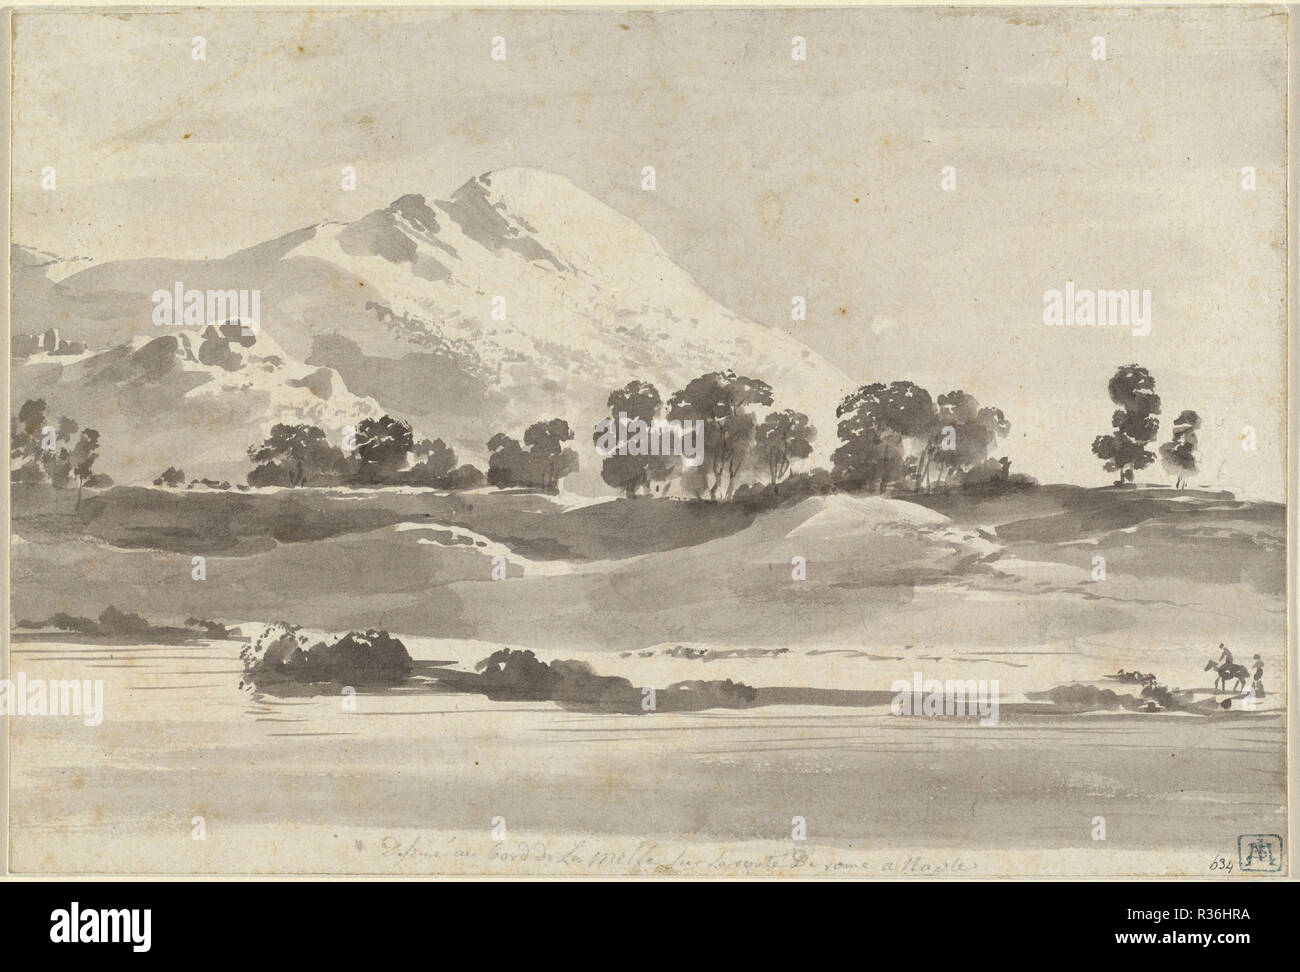 Mount Cairo from across the Melfa River. Dated: c. 1765/1766. Dimensions: overall: 16.1 x 23.9 cm (6 5/16 x 9 7/16 in.). Medium: brush and gray wash on laid paper; laid down. Museum: National Gallery of Art, Washington DC. Author: Jean-Jacques de Boissieu. Stock Photo